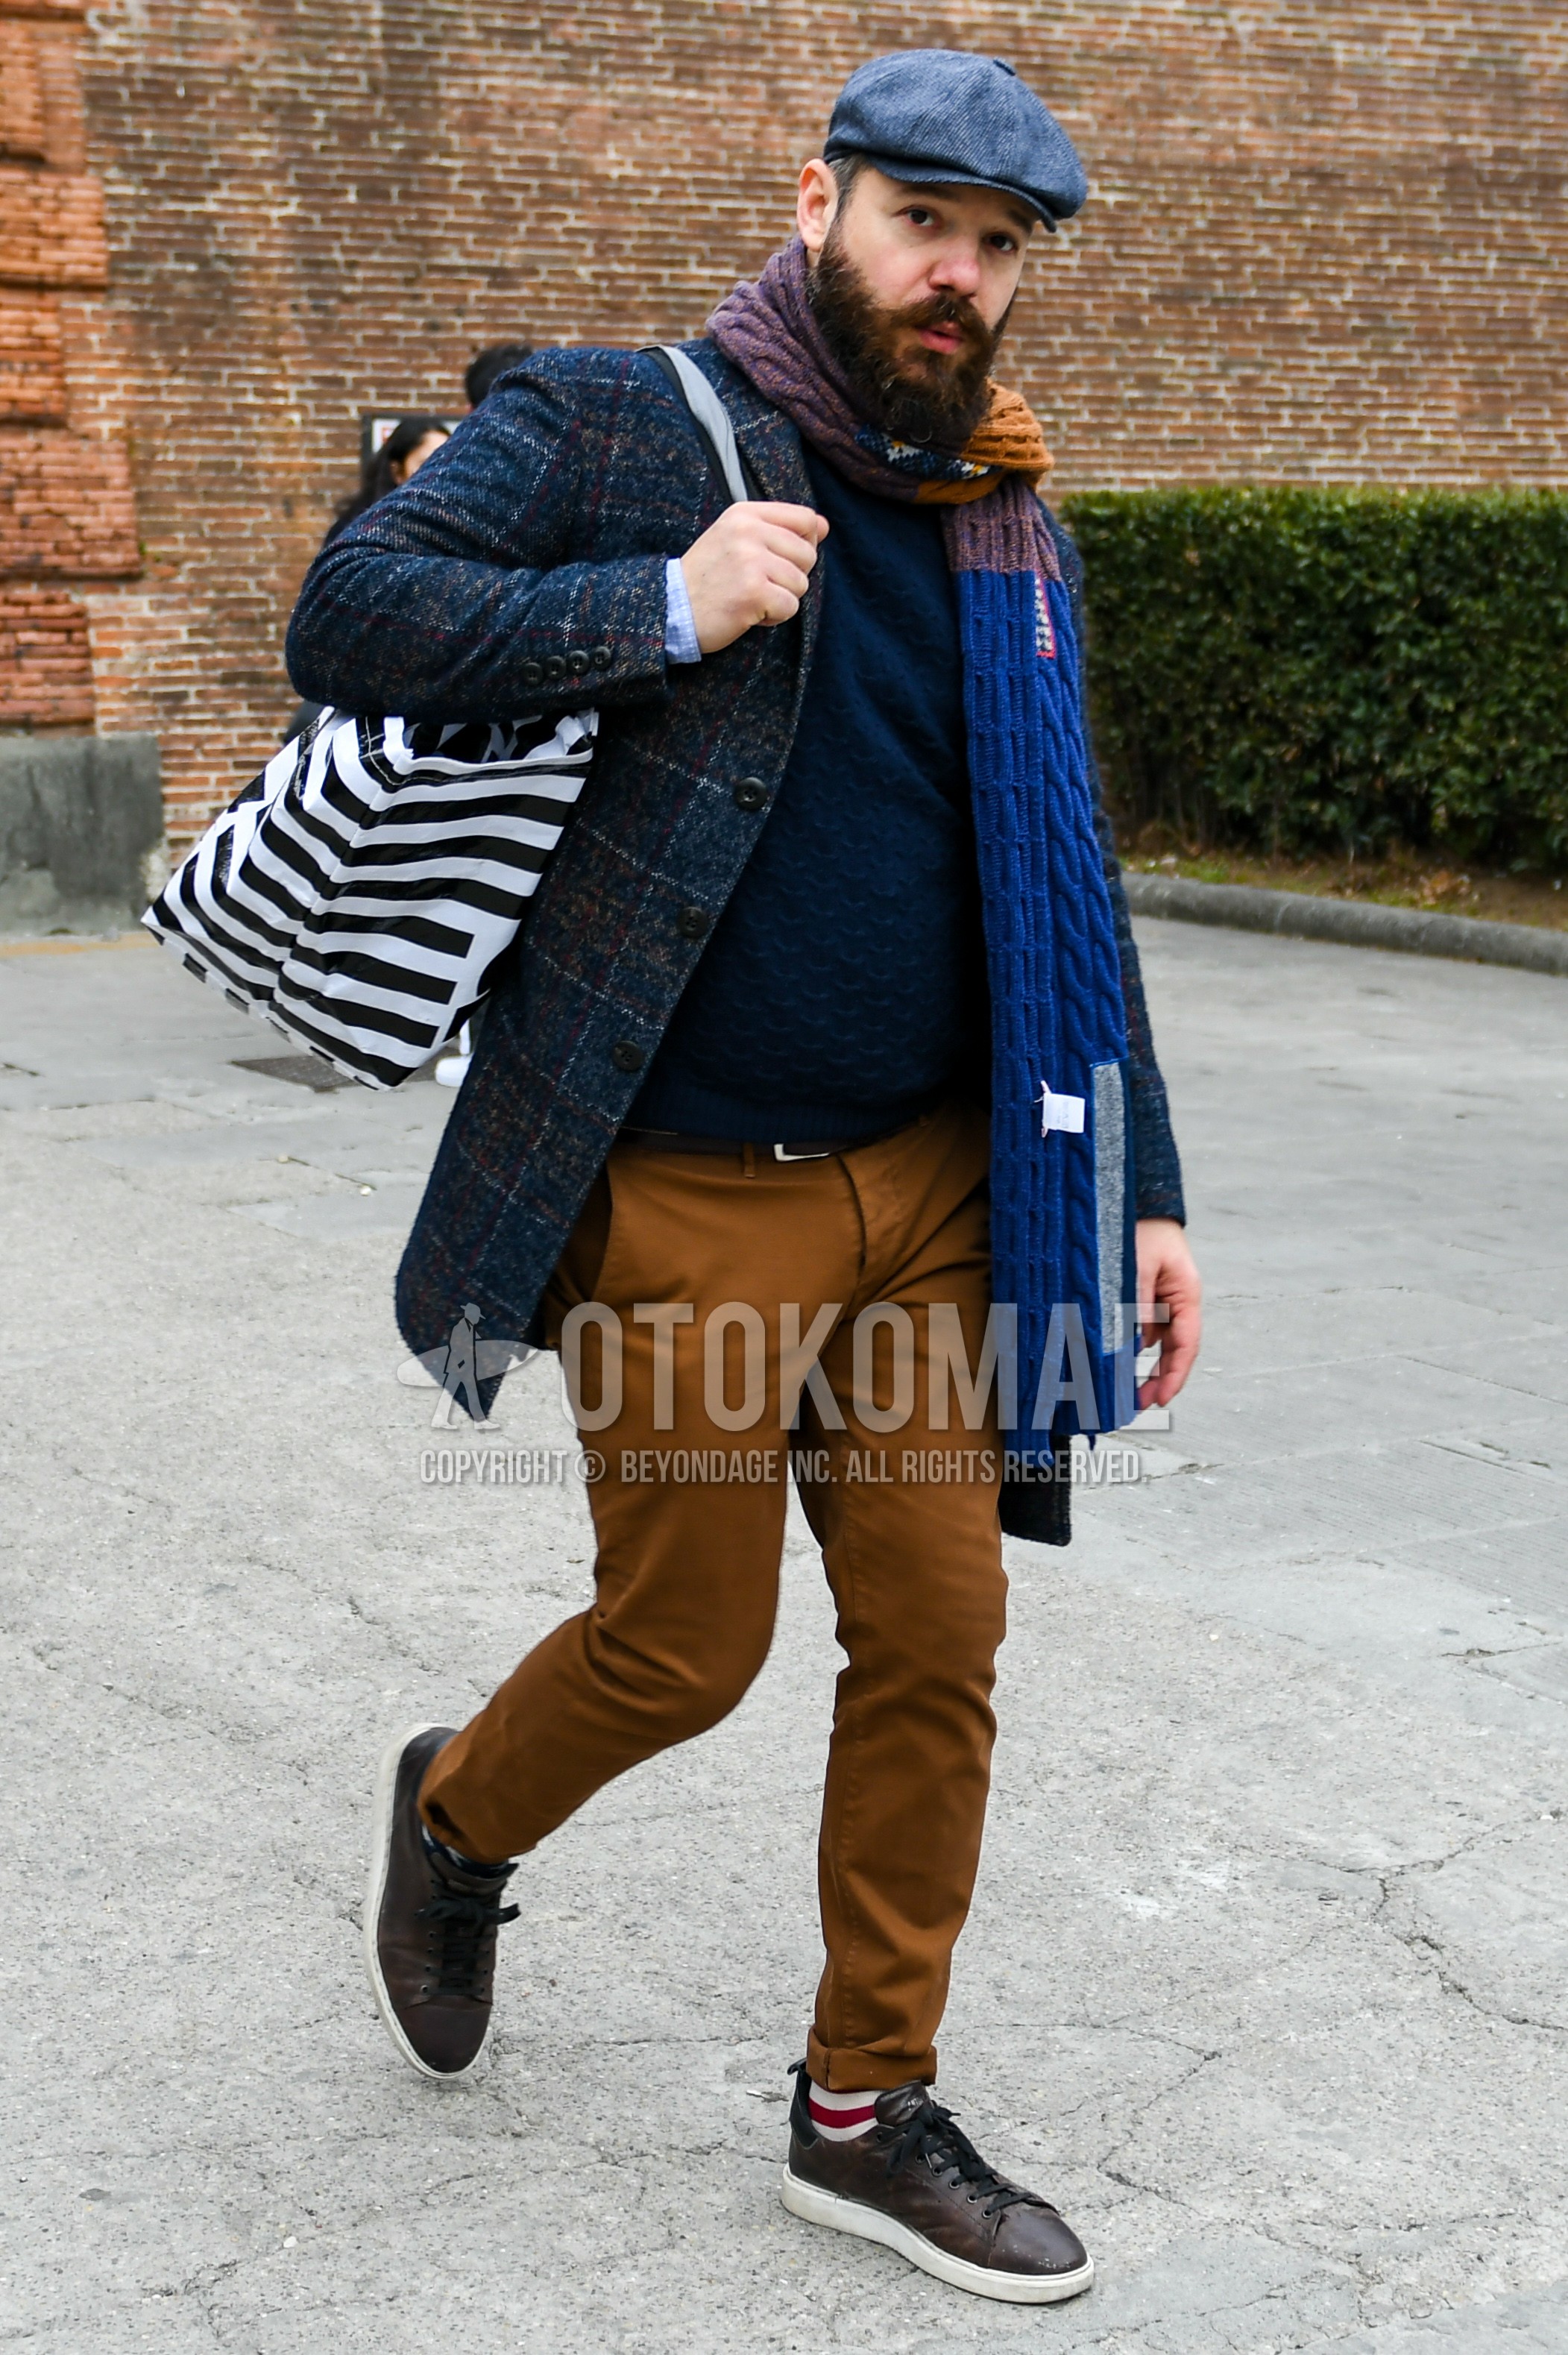 Men's autumn winter outfit with gray plain cap, blue beige brown check scarf, gray check chester coat, gray plain sweater, plain leather belt, brown plain chinos, white red horizontal stripes socks, brown low-cut sneakers, white black horizontal stripes tote bag.